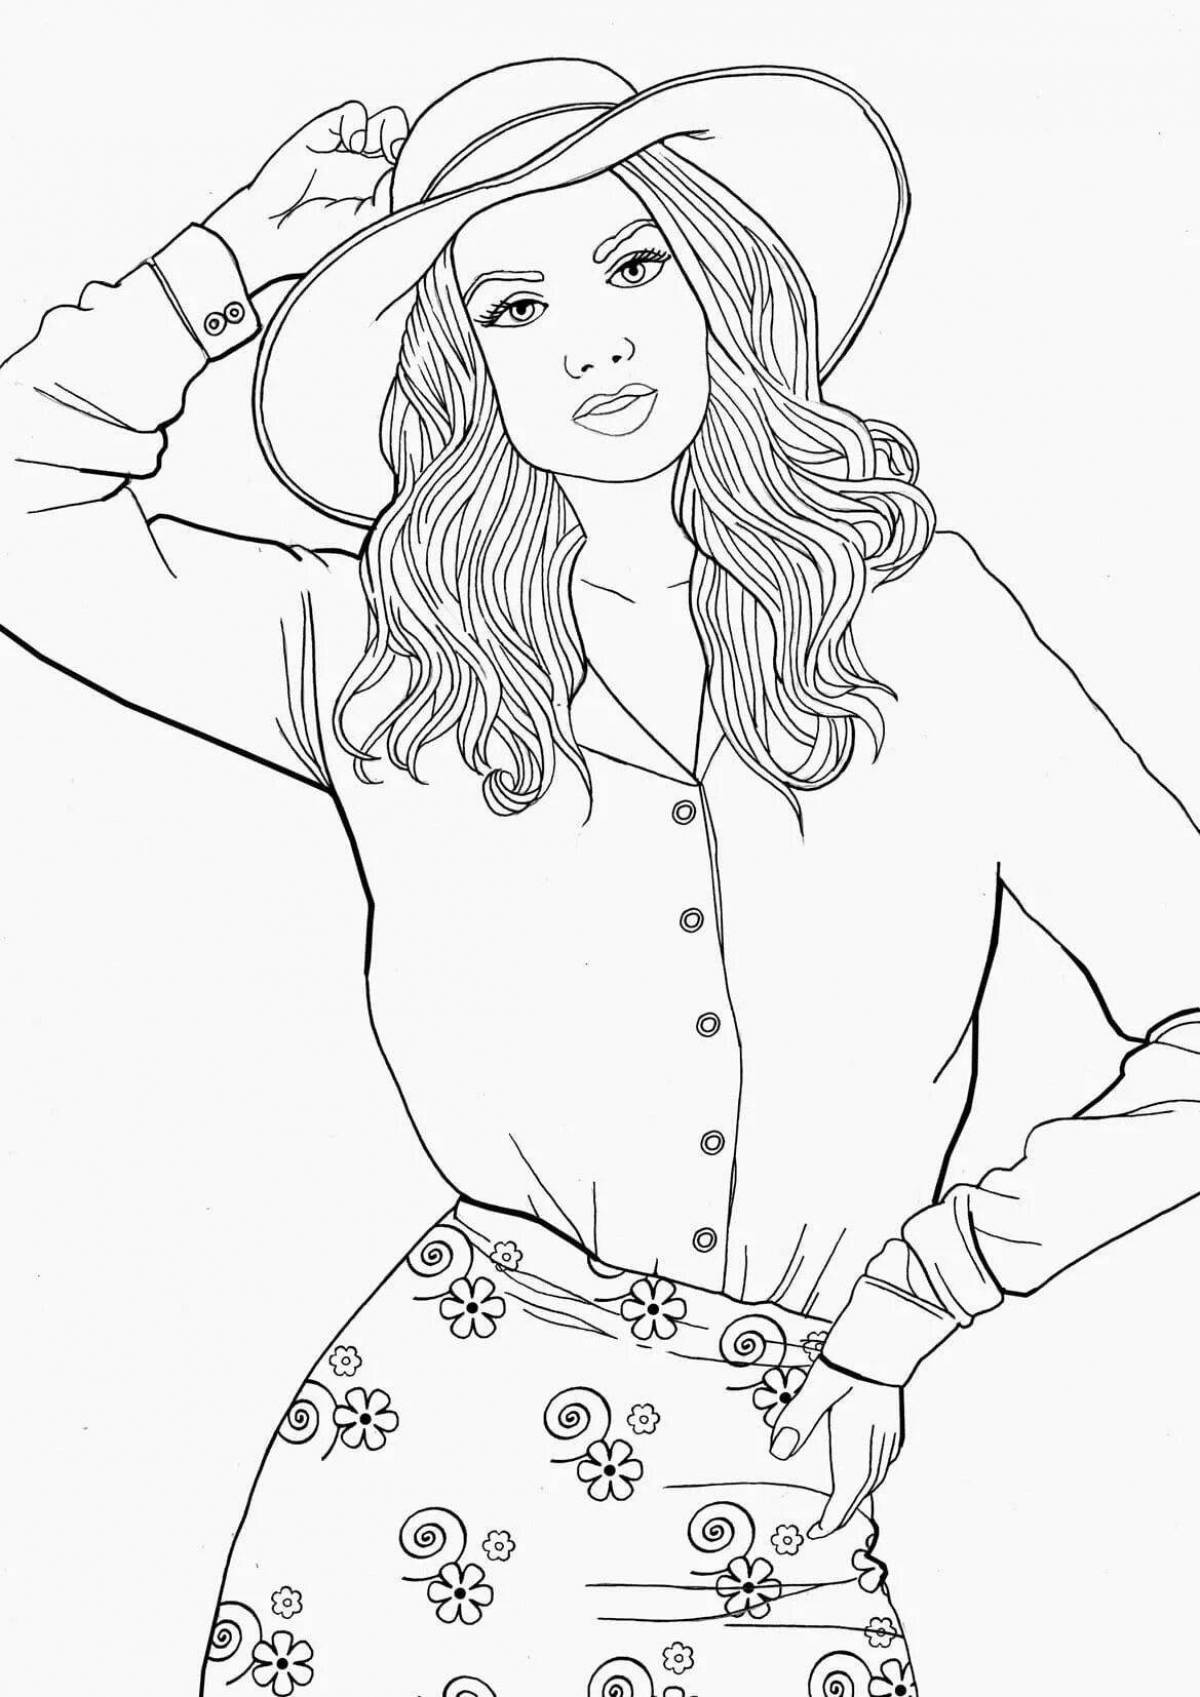 Animated woman coloring book for kids